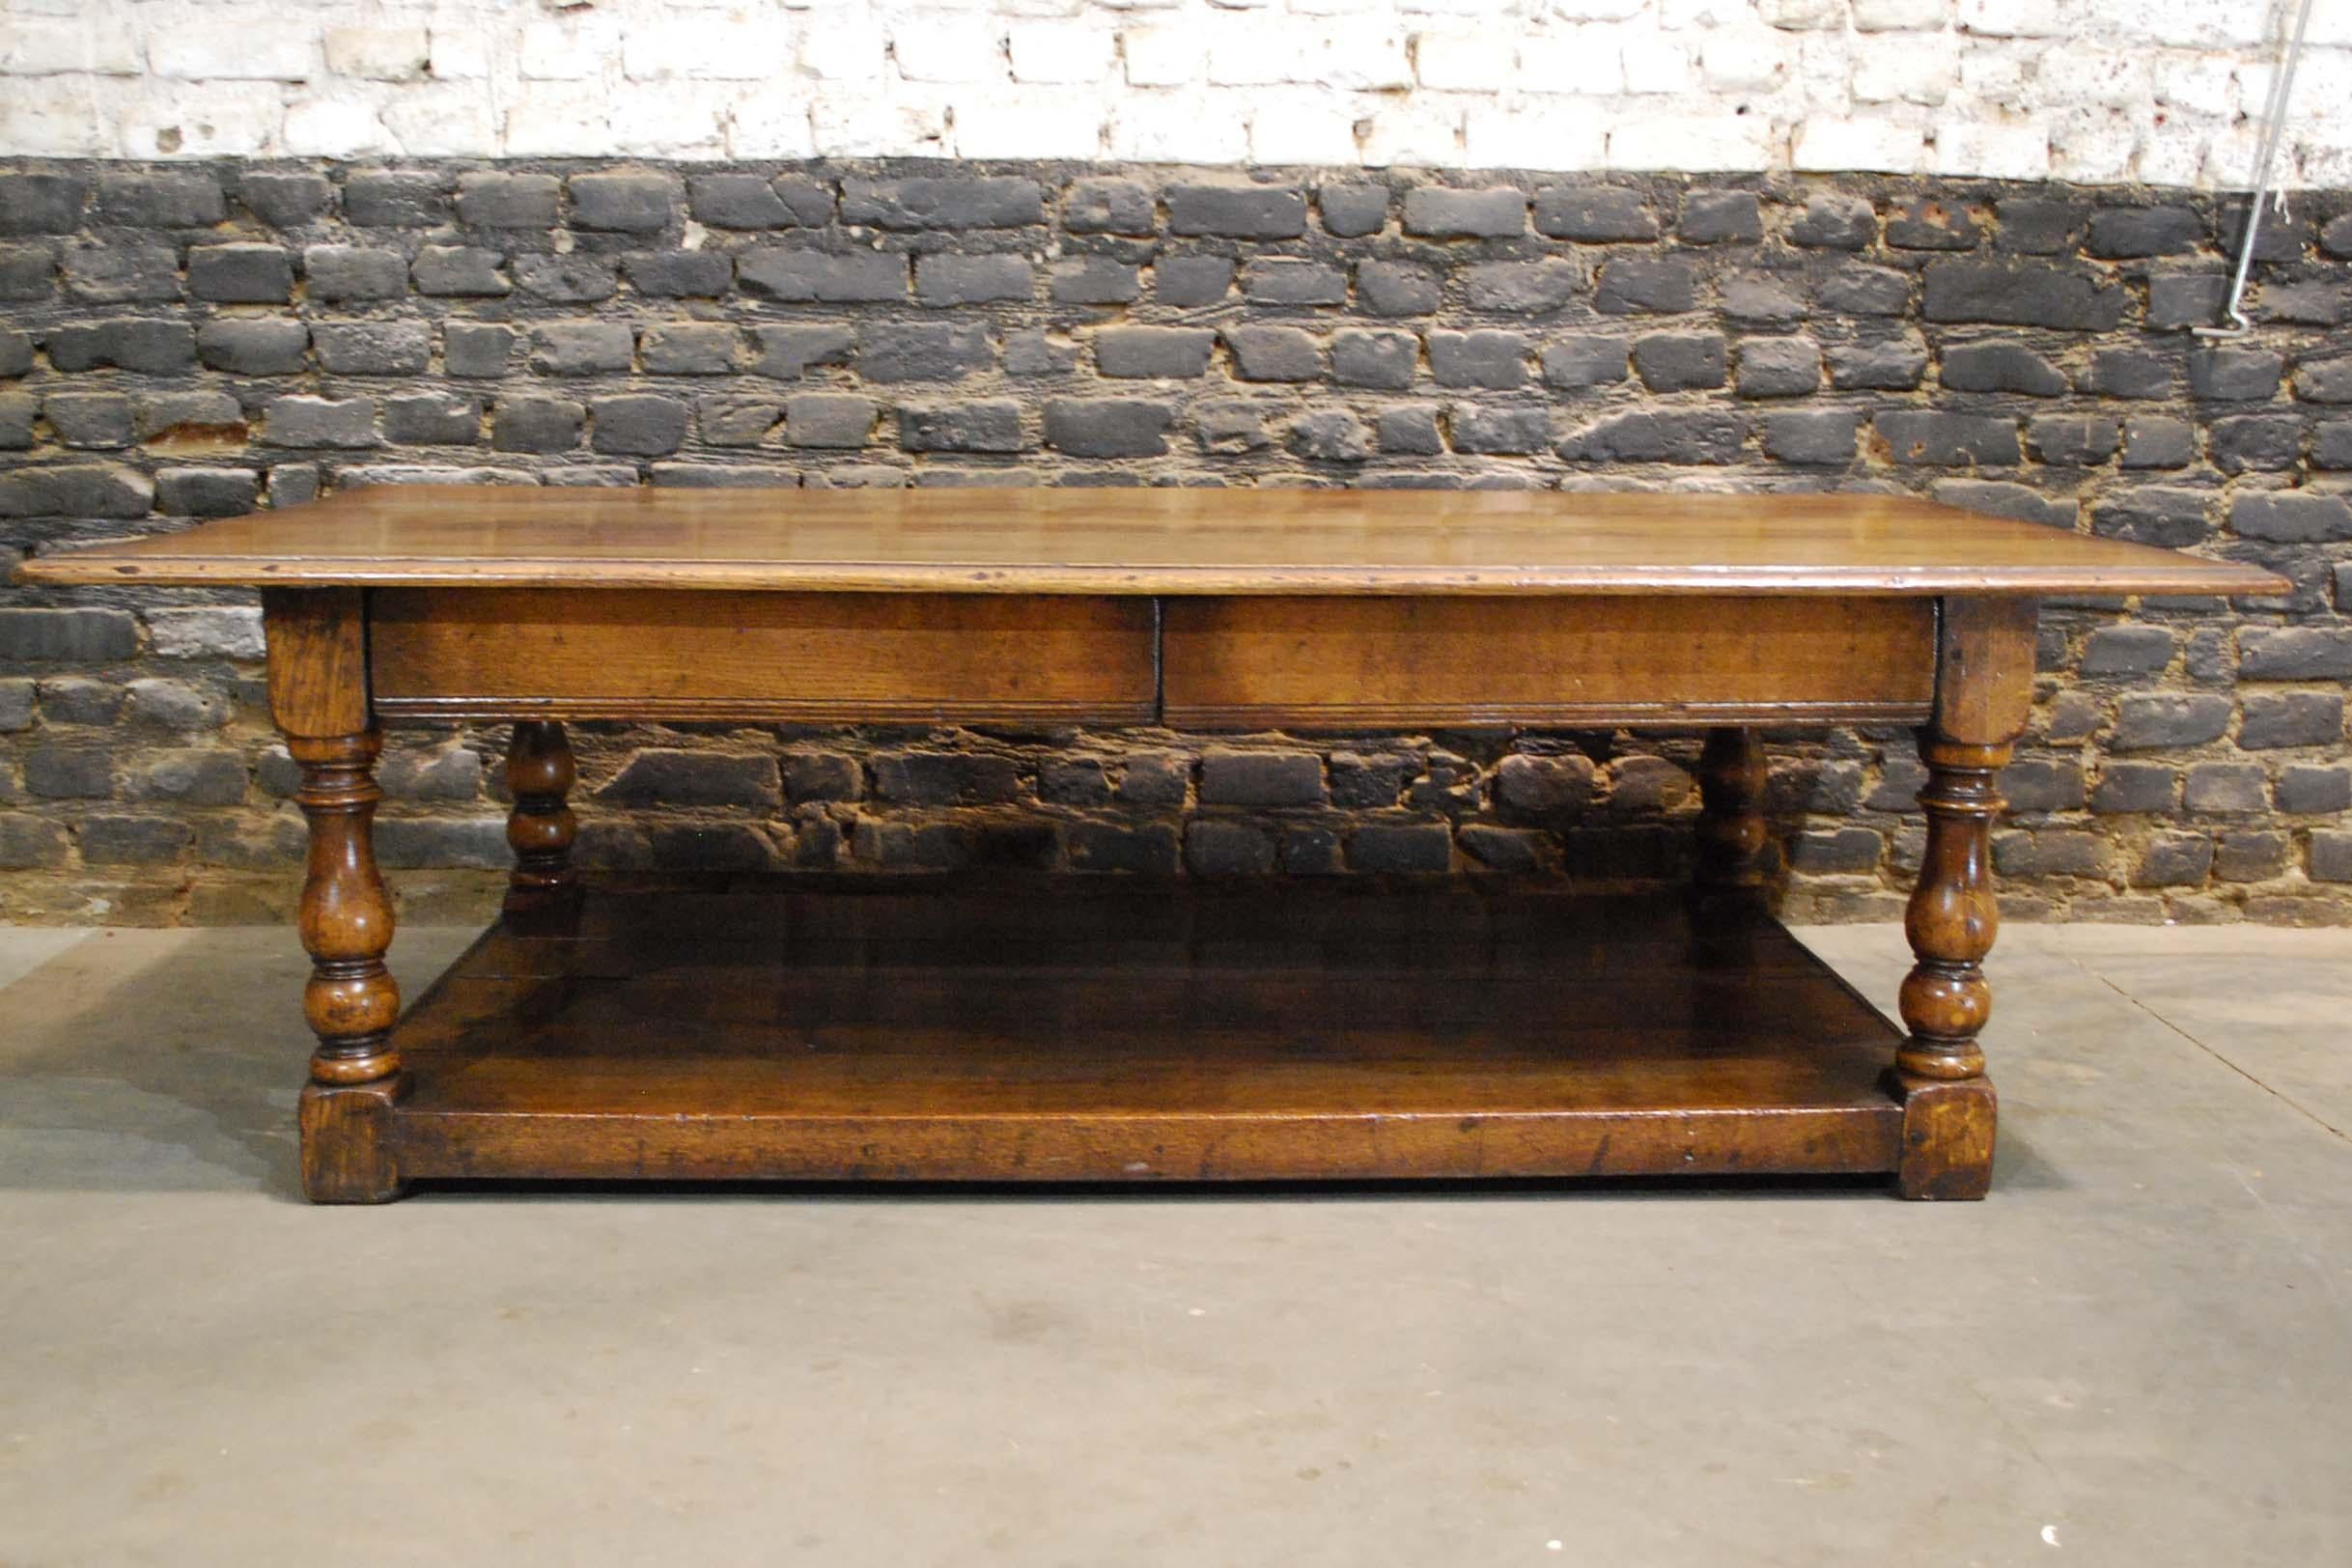 A beautiful coffee table, custom made in the United Kingdom.
It is completely made in the finest quality solid oak. The table has four turned slender baluster legs.
The skirt houses two hidden oak drawers. Below sits a planked pot board. The